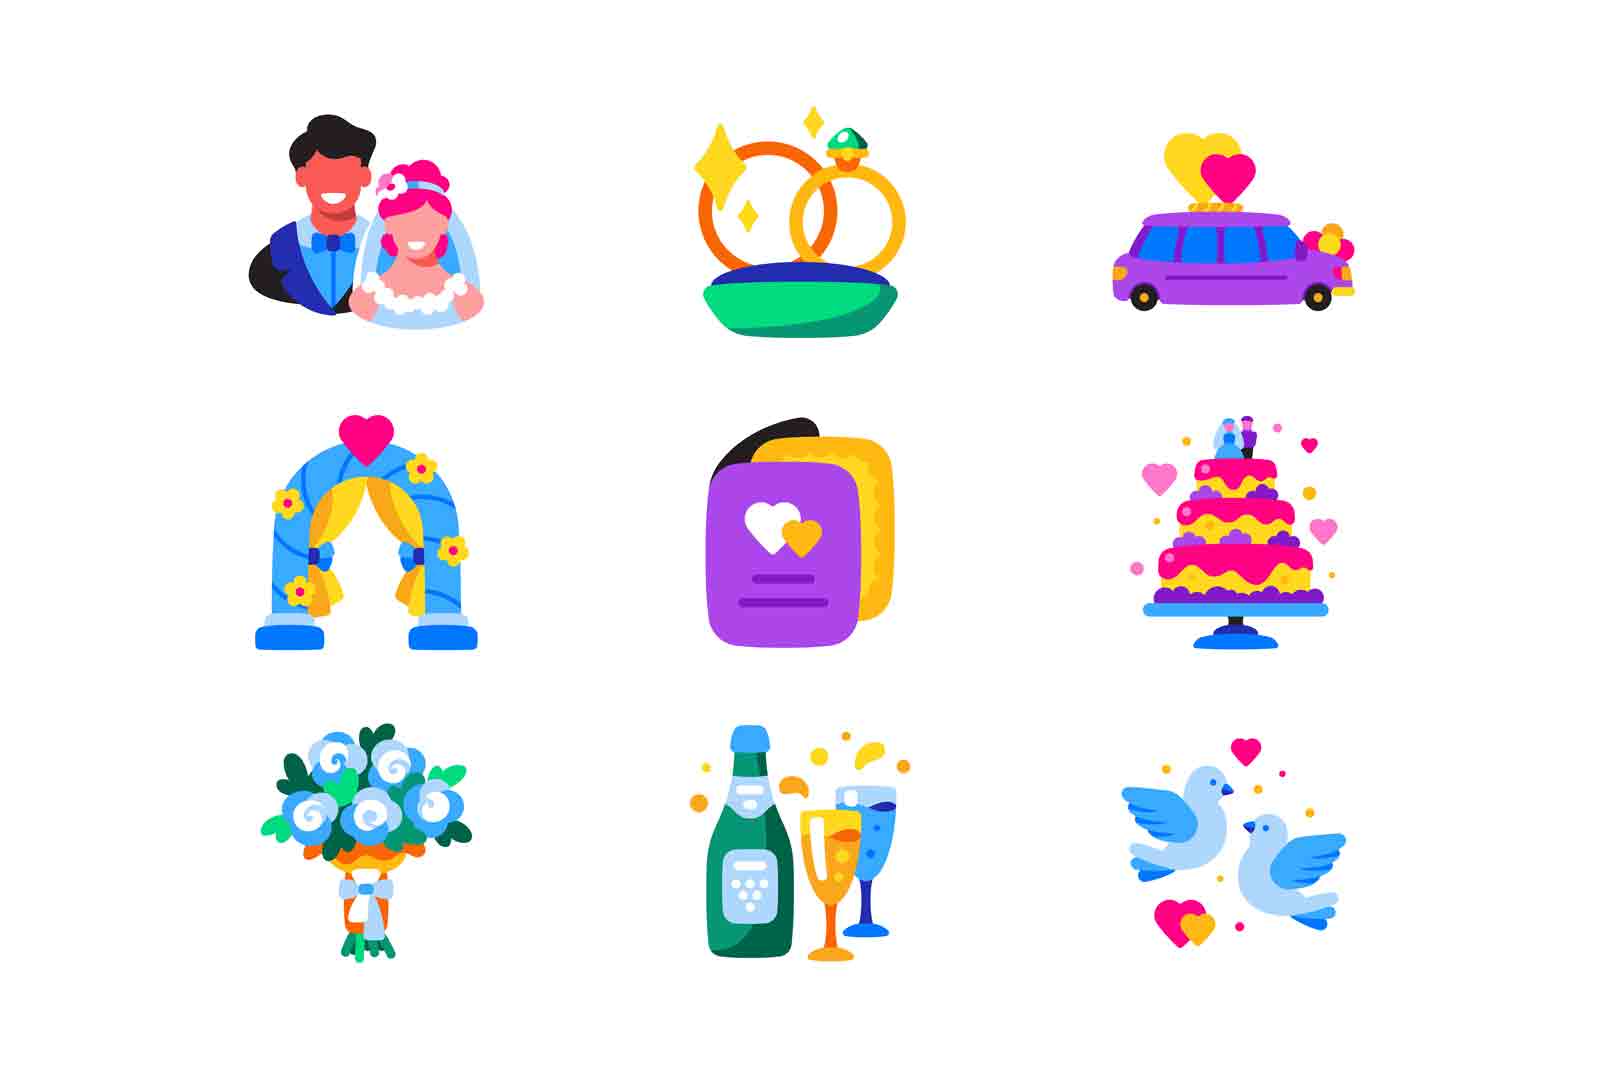 Wedding accessories icons set vector illustration. Collection of bride and groom, rings, cake, flowers and festive arch flat style concept